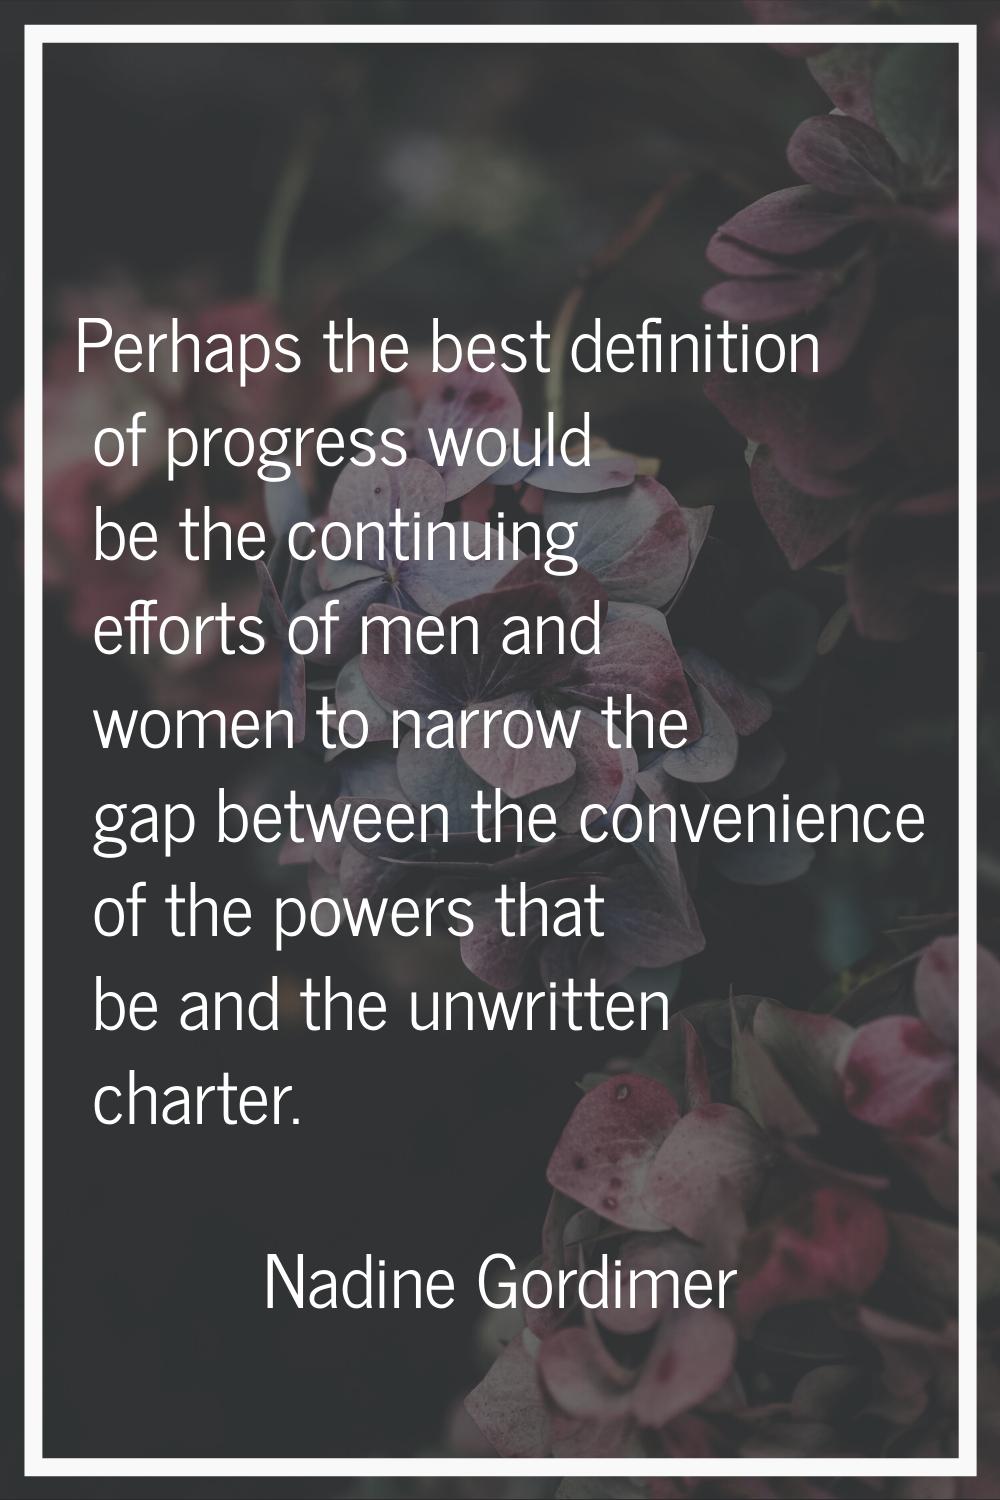 Perhaps the best definition of progress would be the continuing efforts of men and women to narrow 